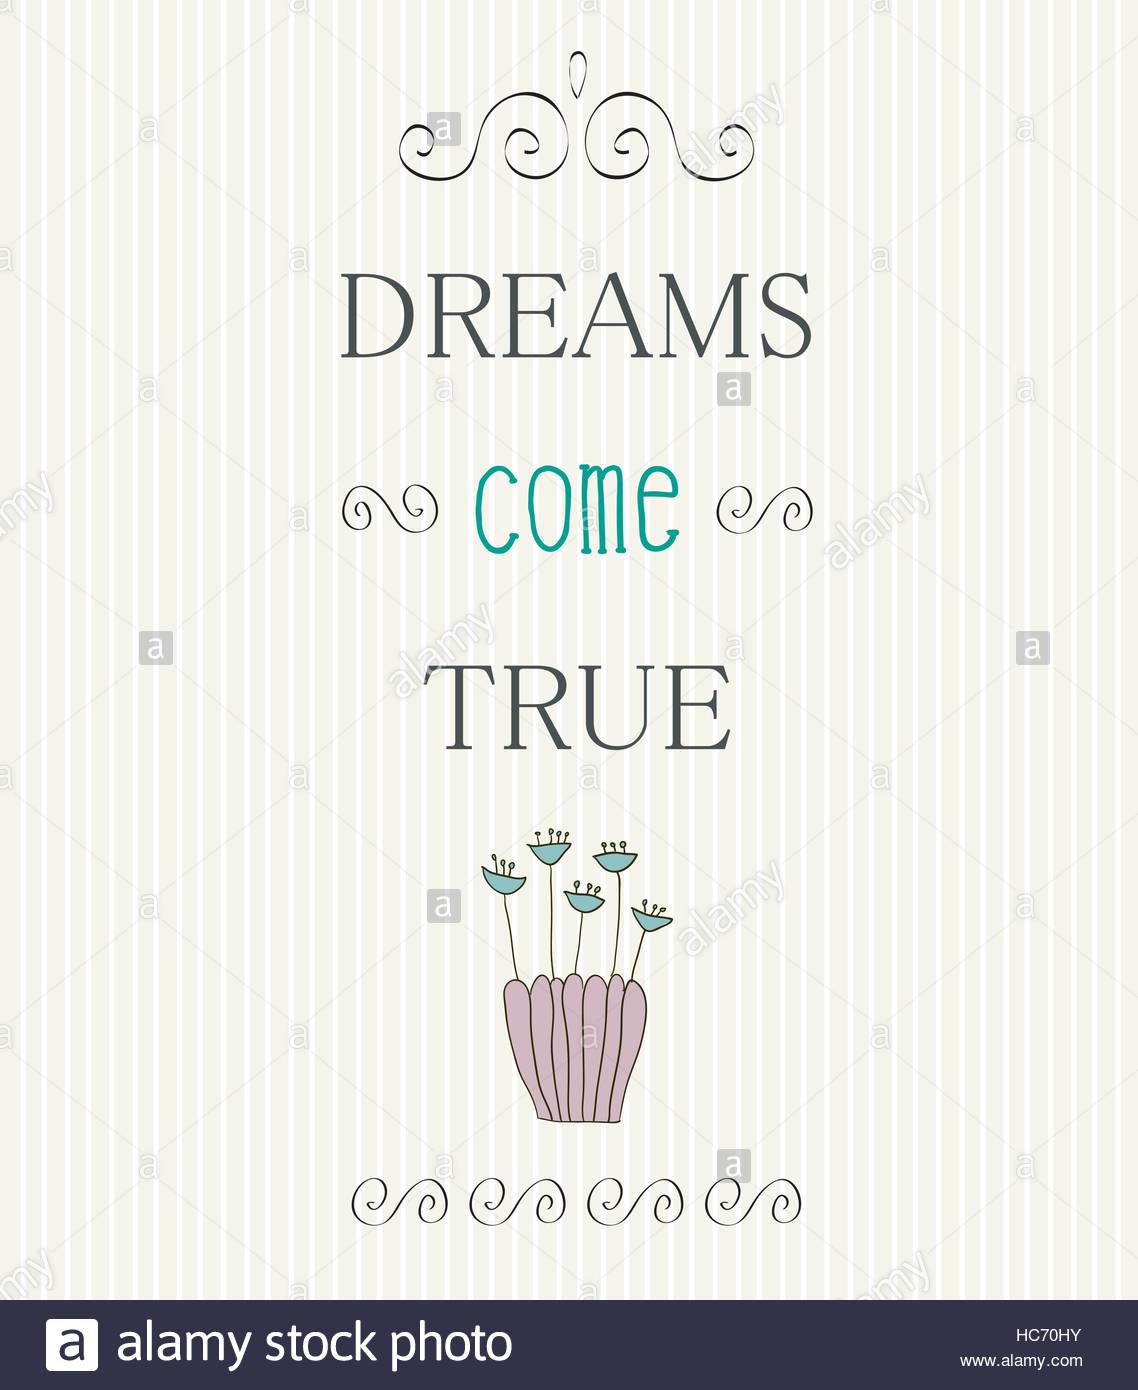 Vintage Typographic Background With Motivational Quotes Dreams Come